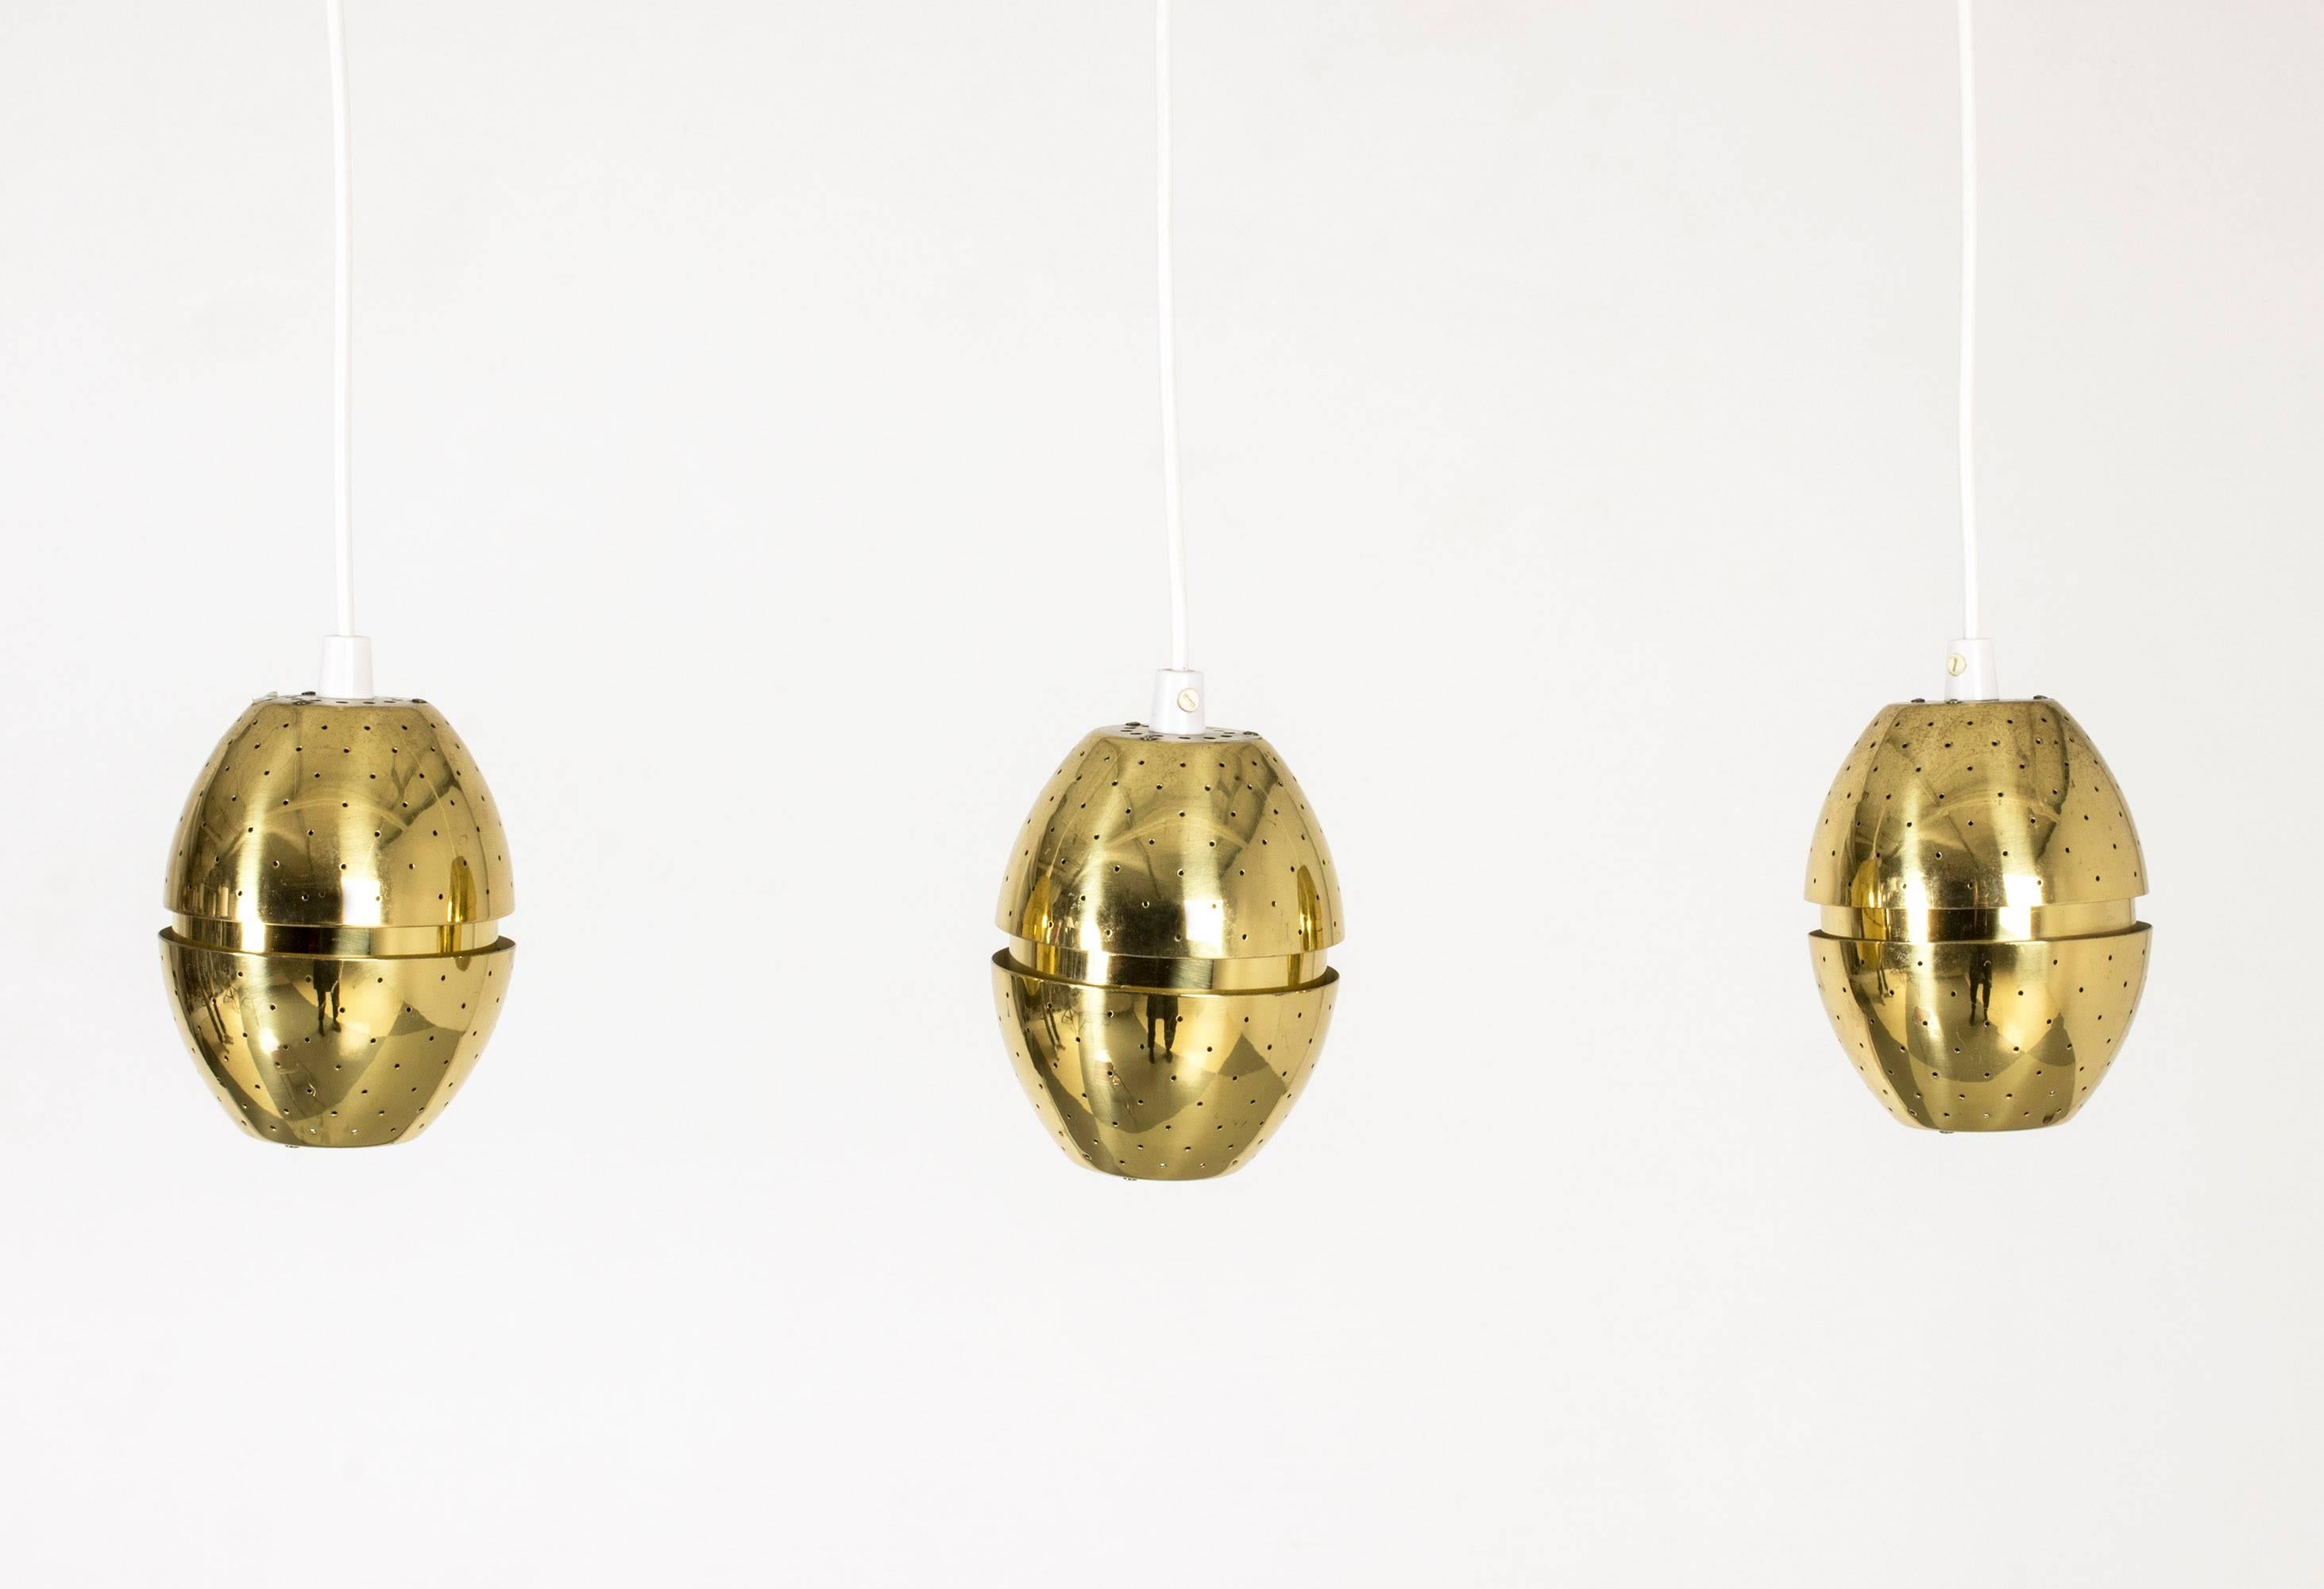 Set of three cool, egg-shaped brass pendant lights by Hans-Agne Jakobsson. The lights have separate wiring and are often used as window lights. Beautiful when lit with little points of light coming from every hole.